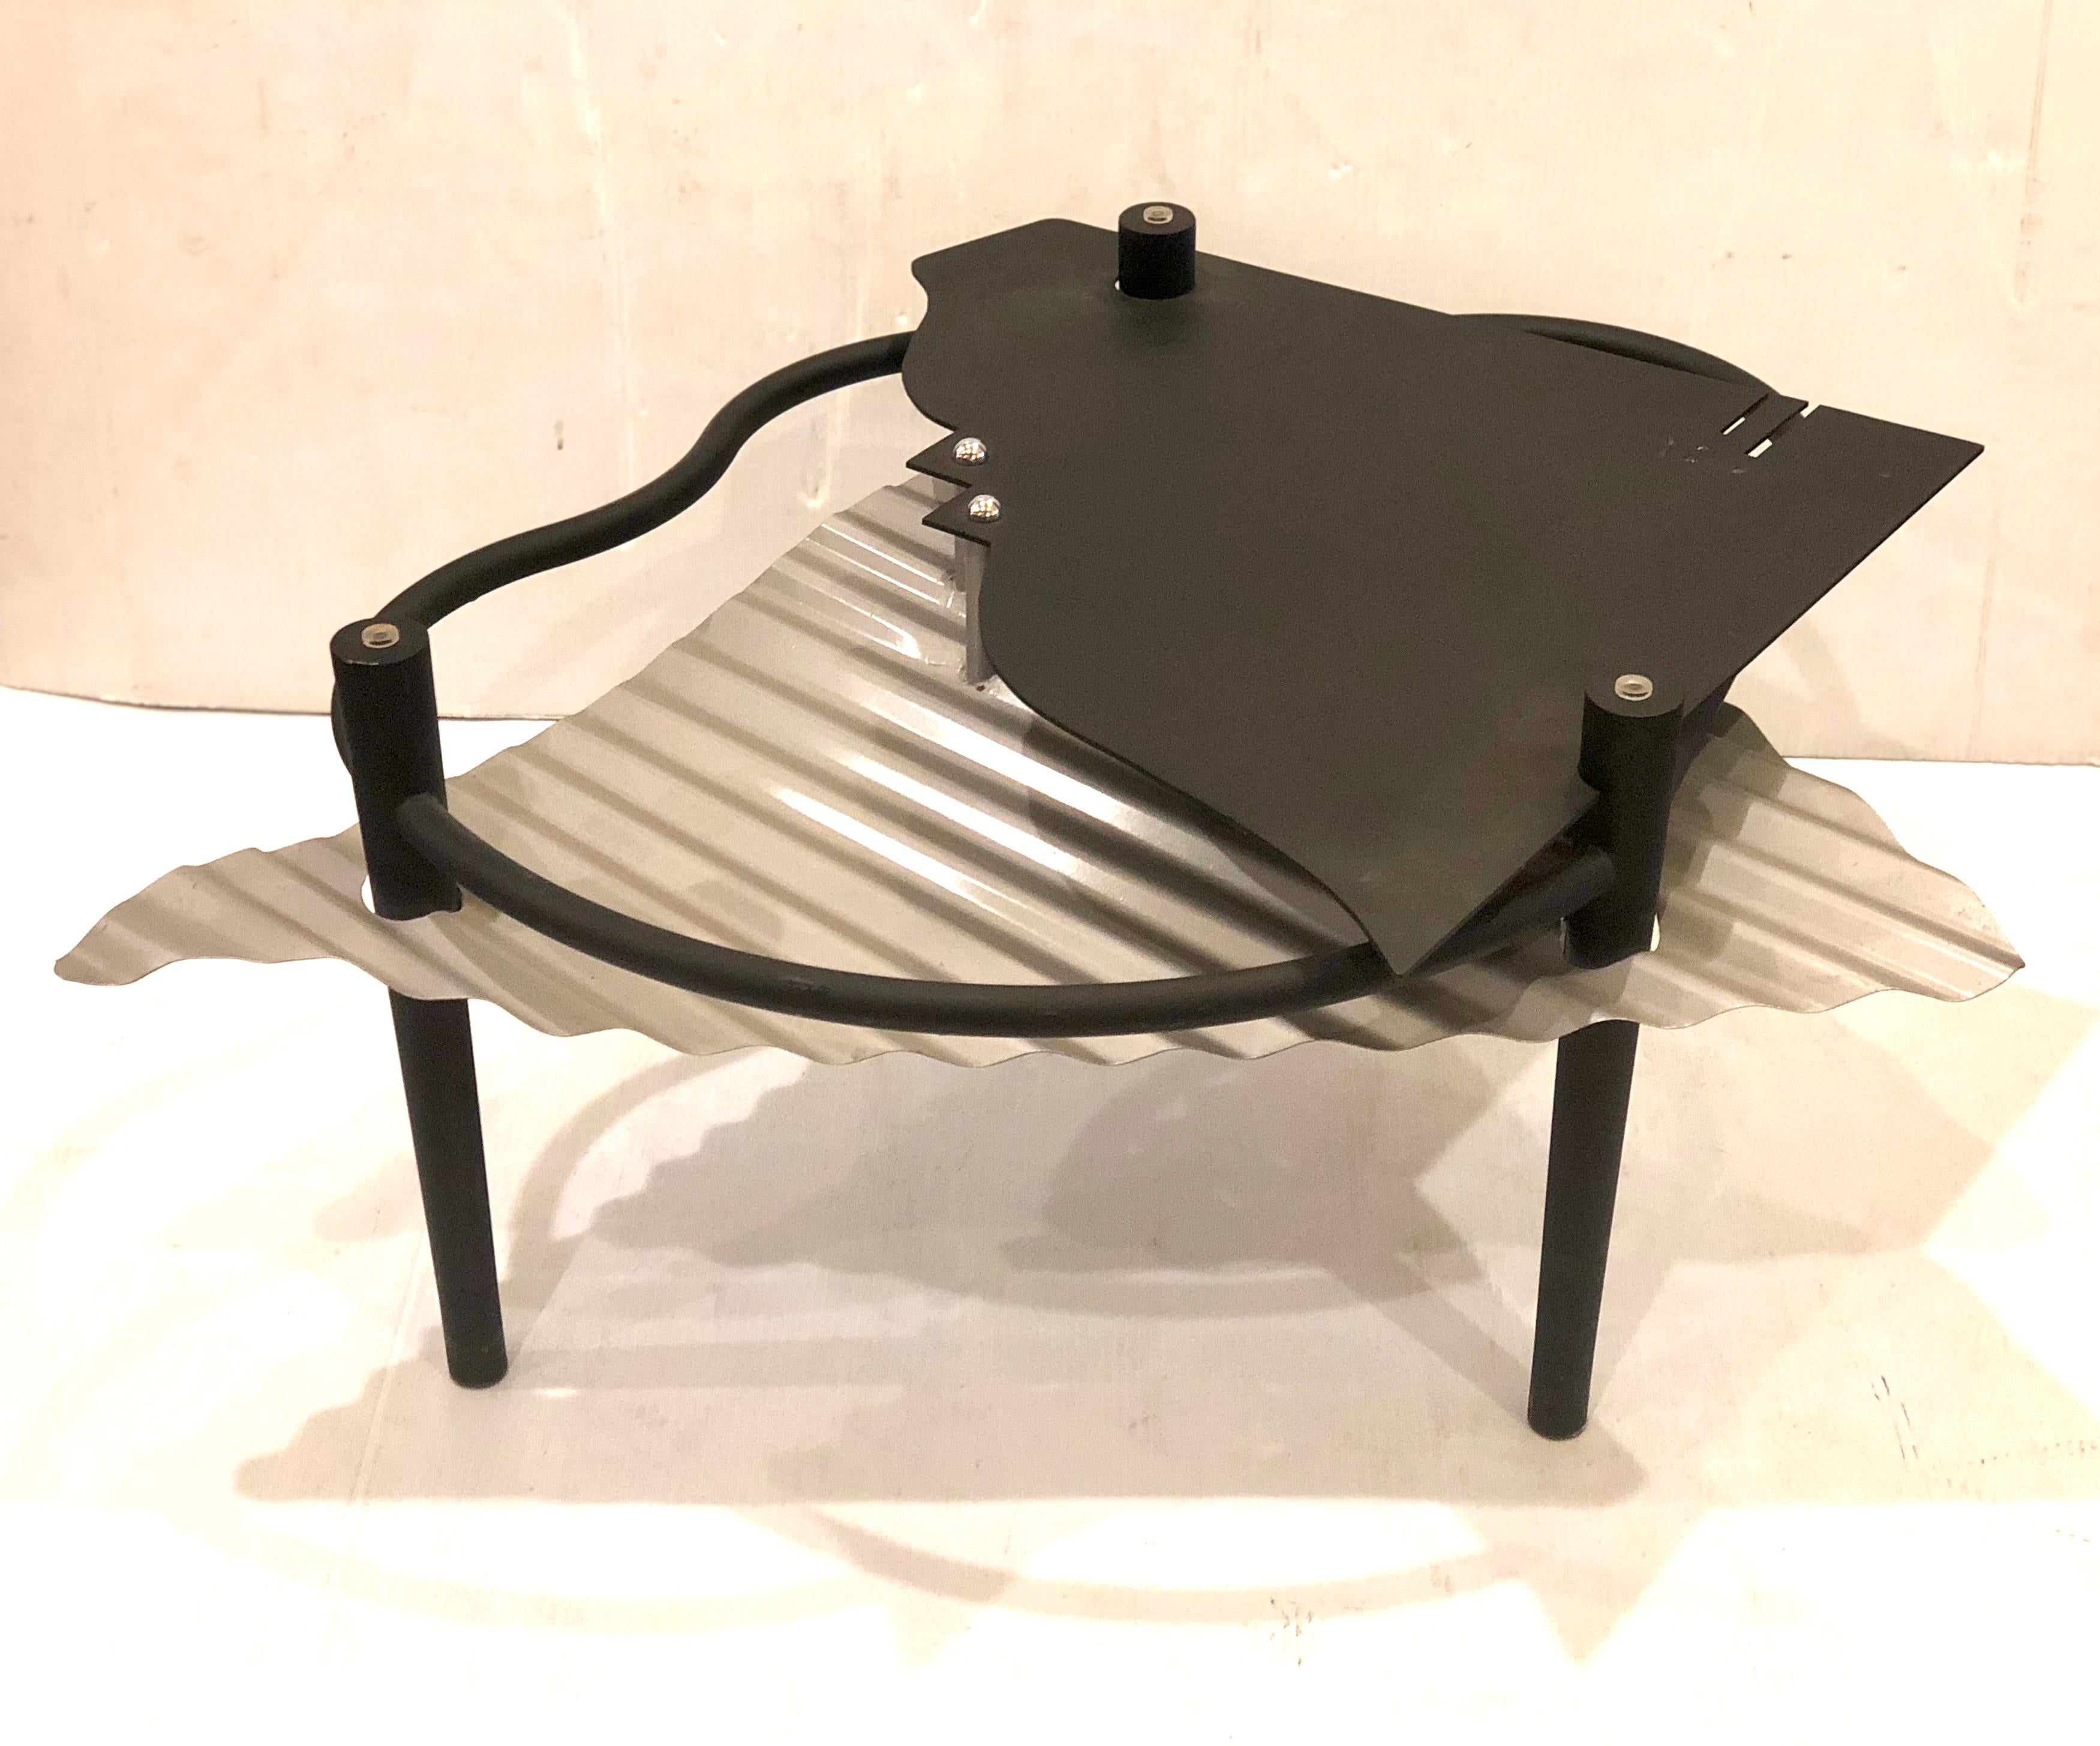 Rare coffee table base by Design Institute America, in metal black mate and silver powder coated base, trigged takes a round glass or freeform glass, with chrome accents the glass its not included so the customer can put any shape and size that